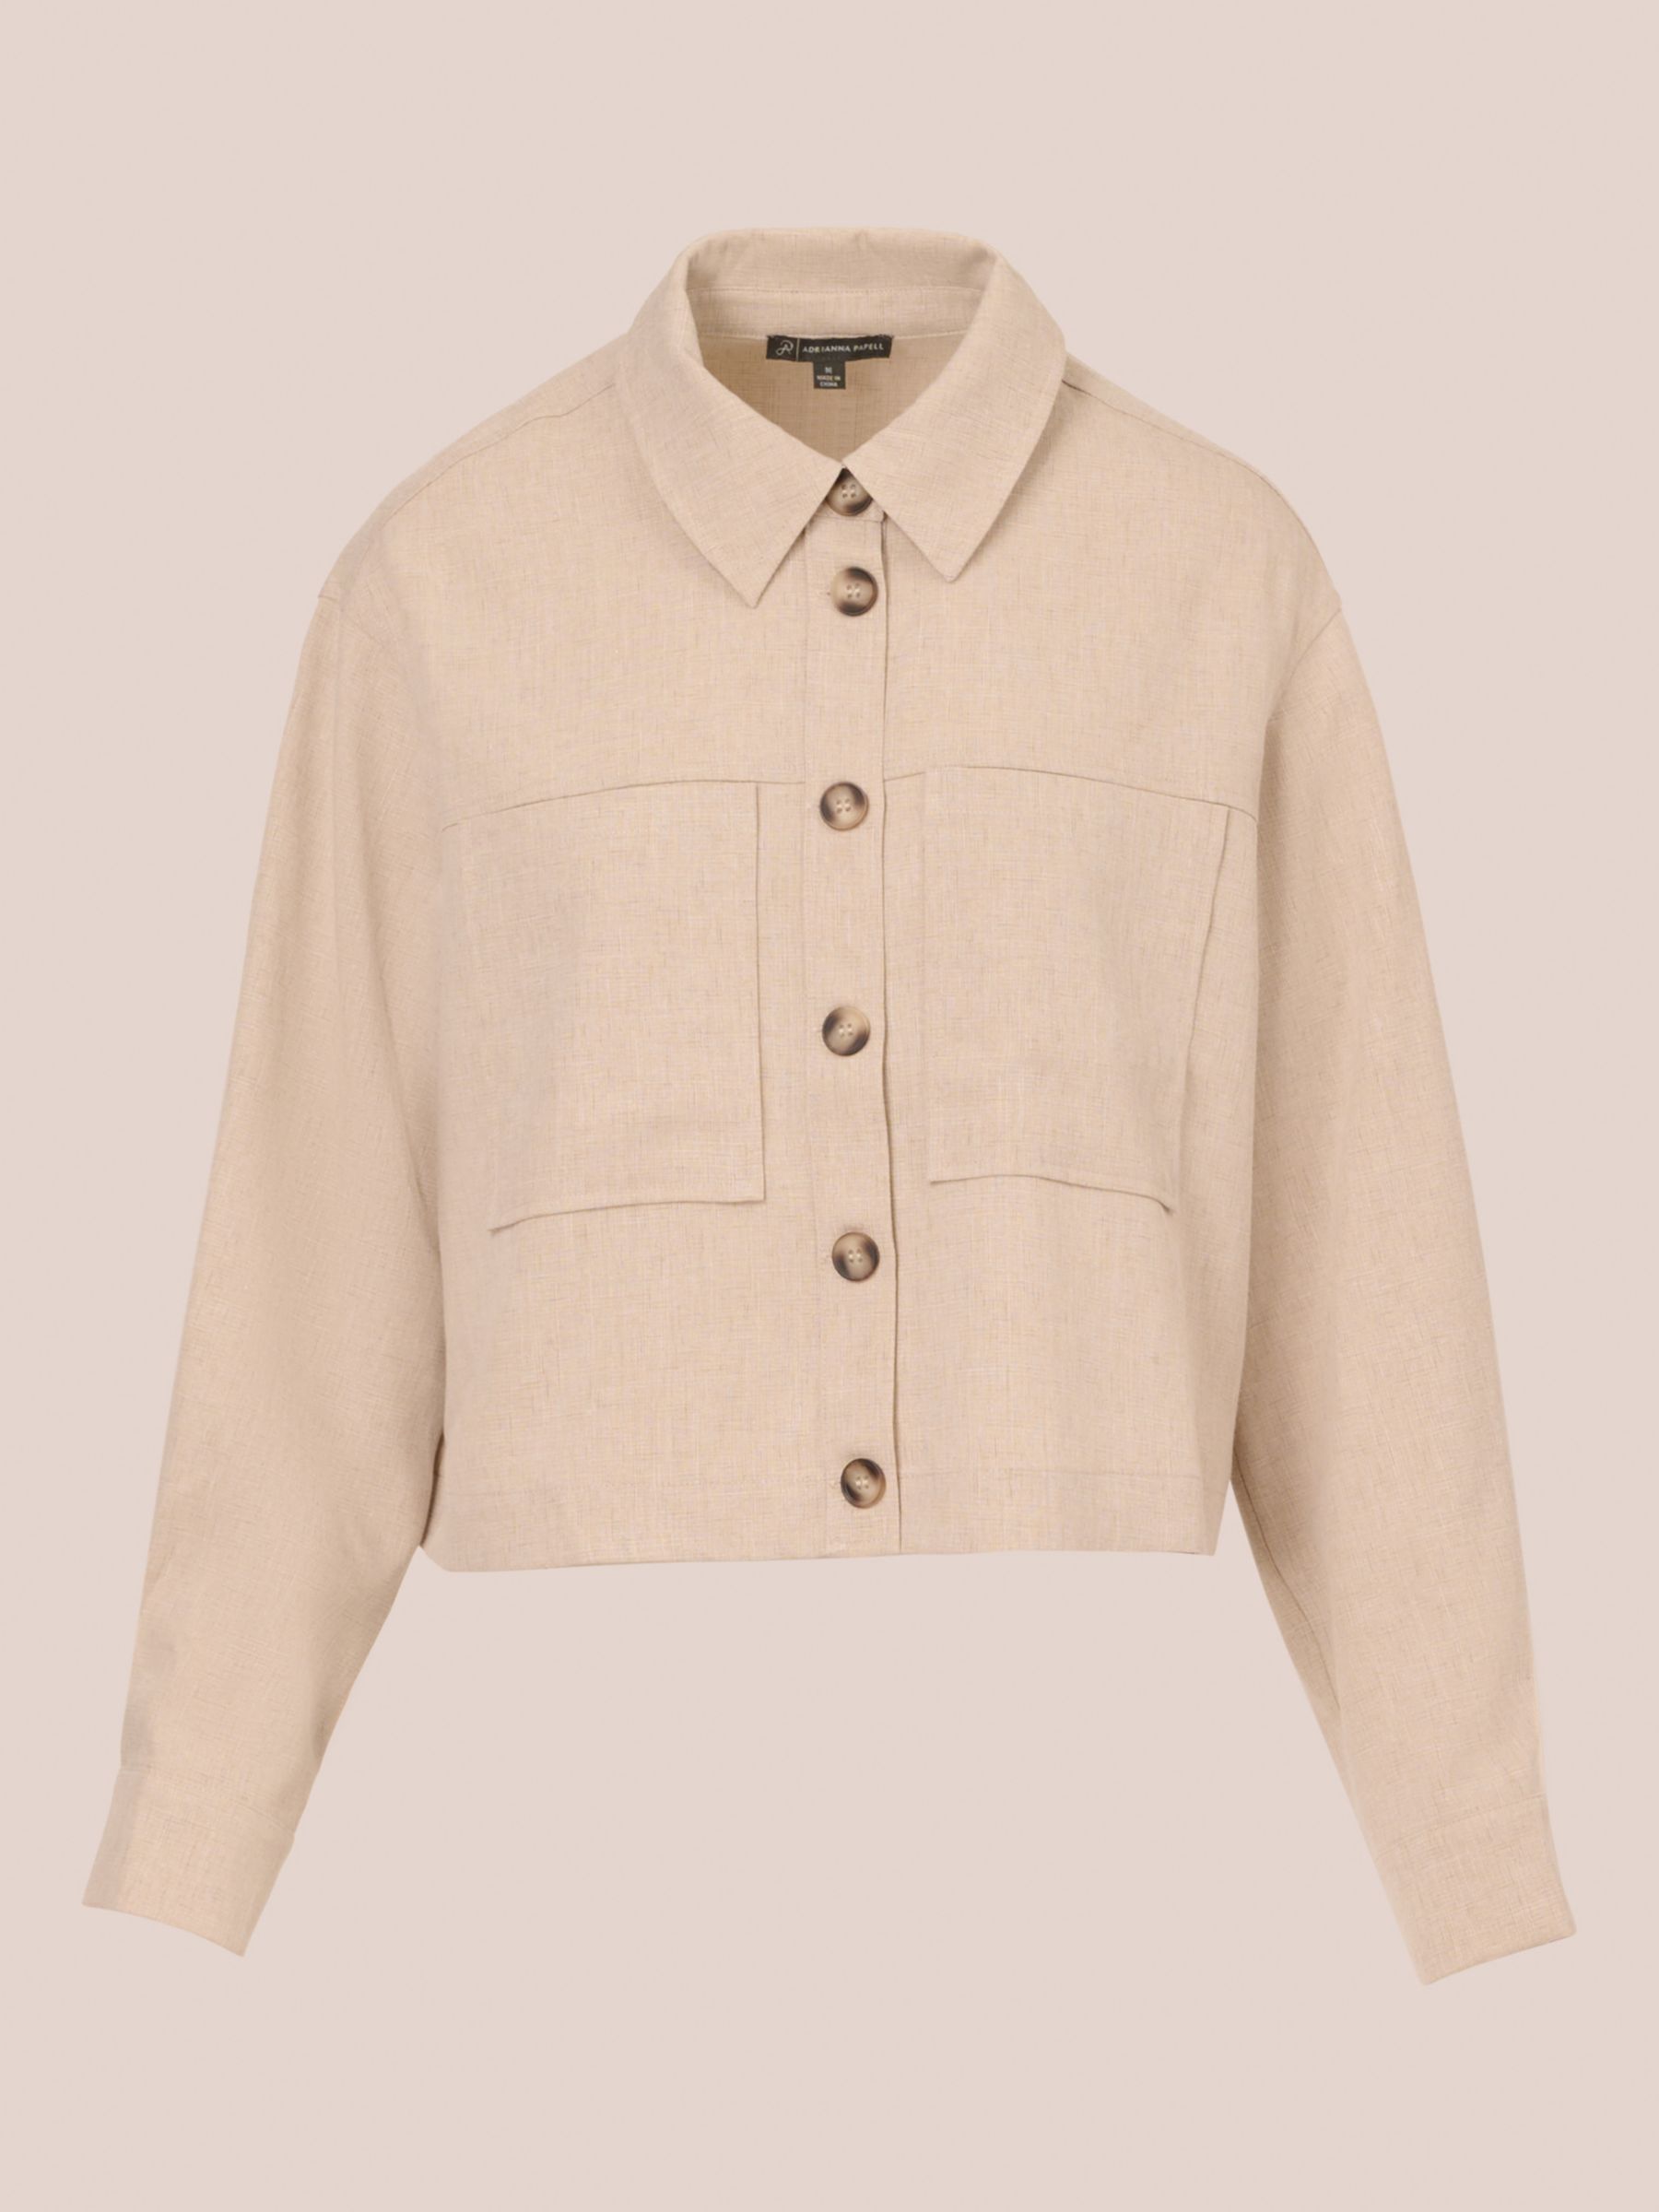 Adrianna Papell Button Up Utility Jacket, Flax at John Lewis & Partners